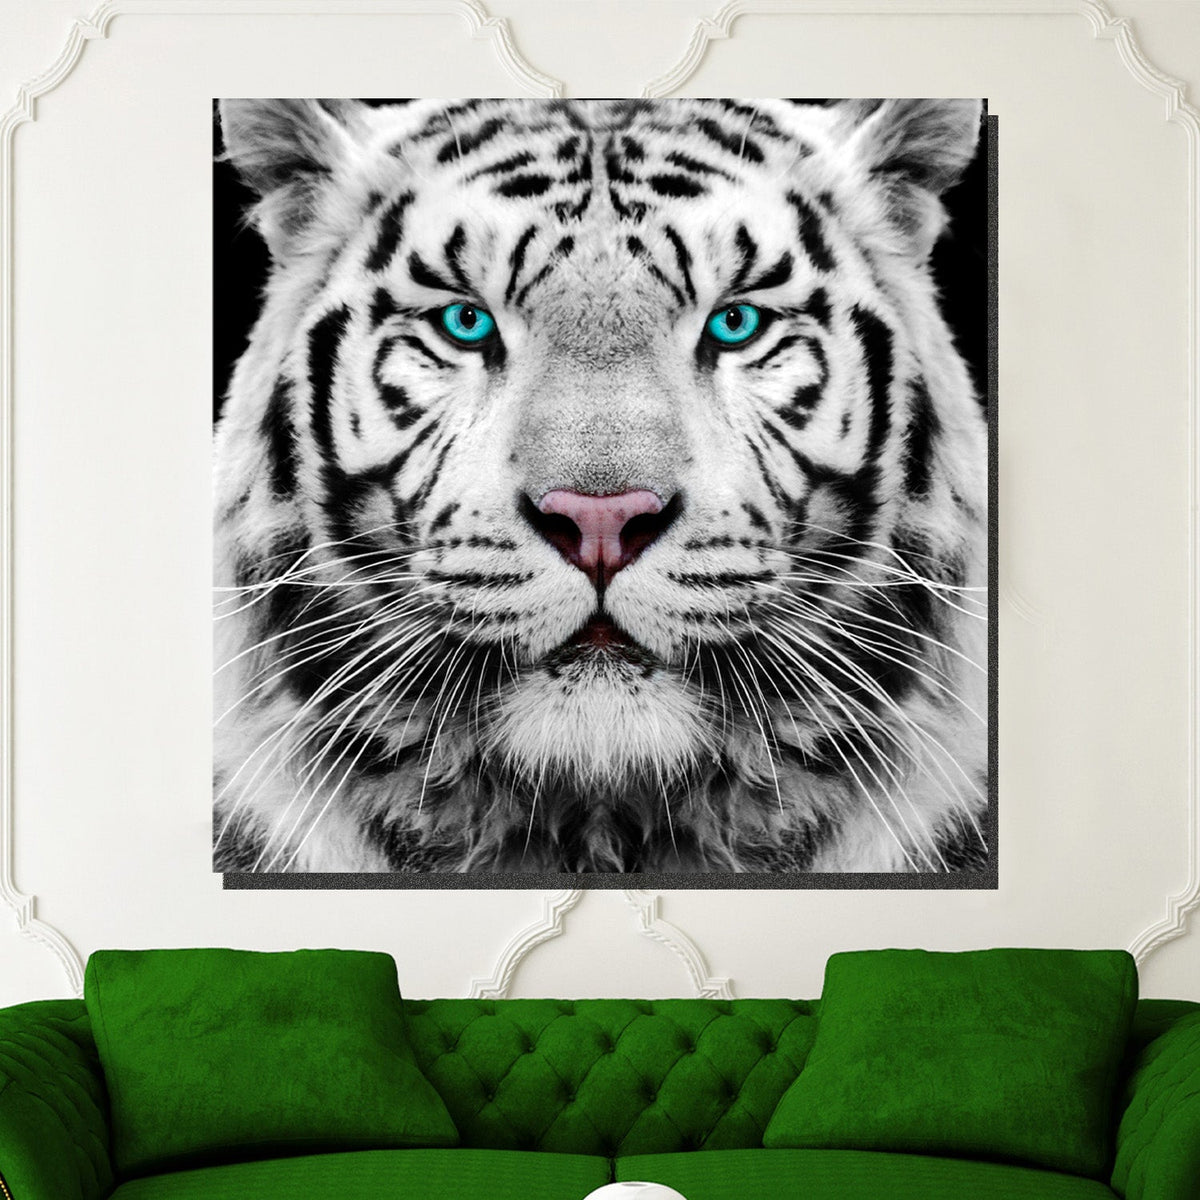 https://cdn.shopify.com/s/files/1/0387/9986/8044/products/SnowTigerCanvasArtprintStretched-4.jpg